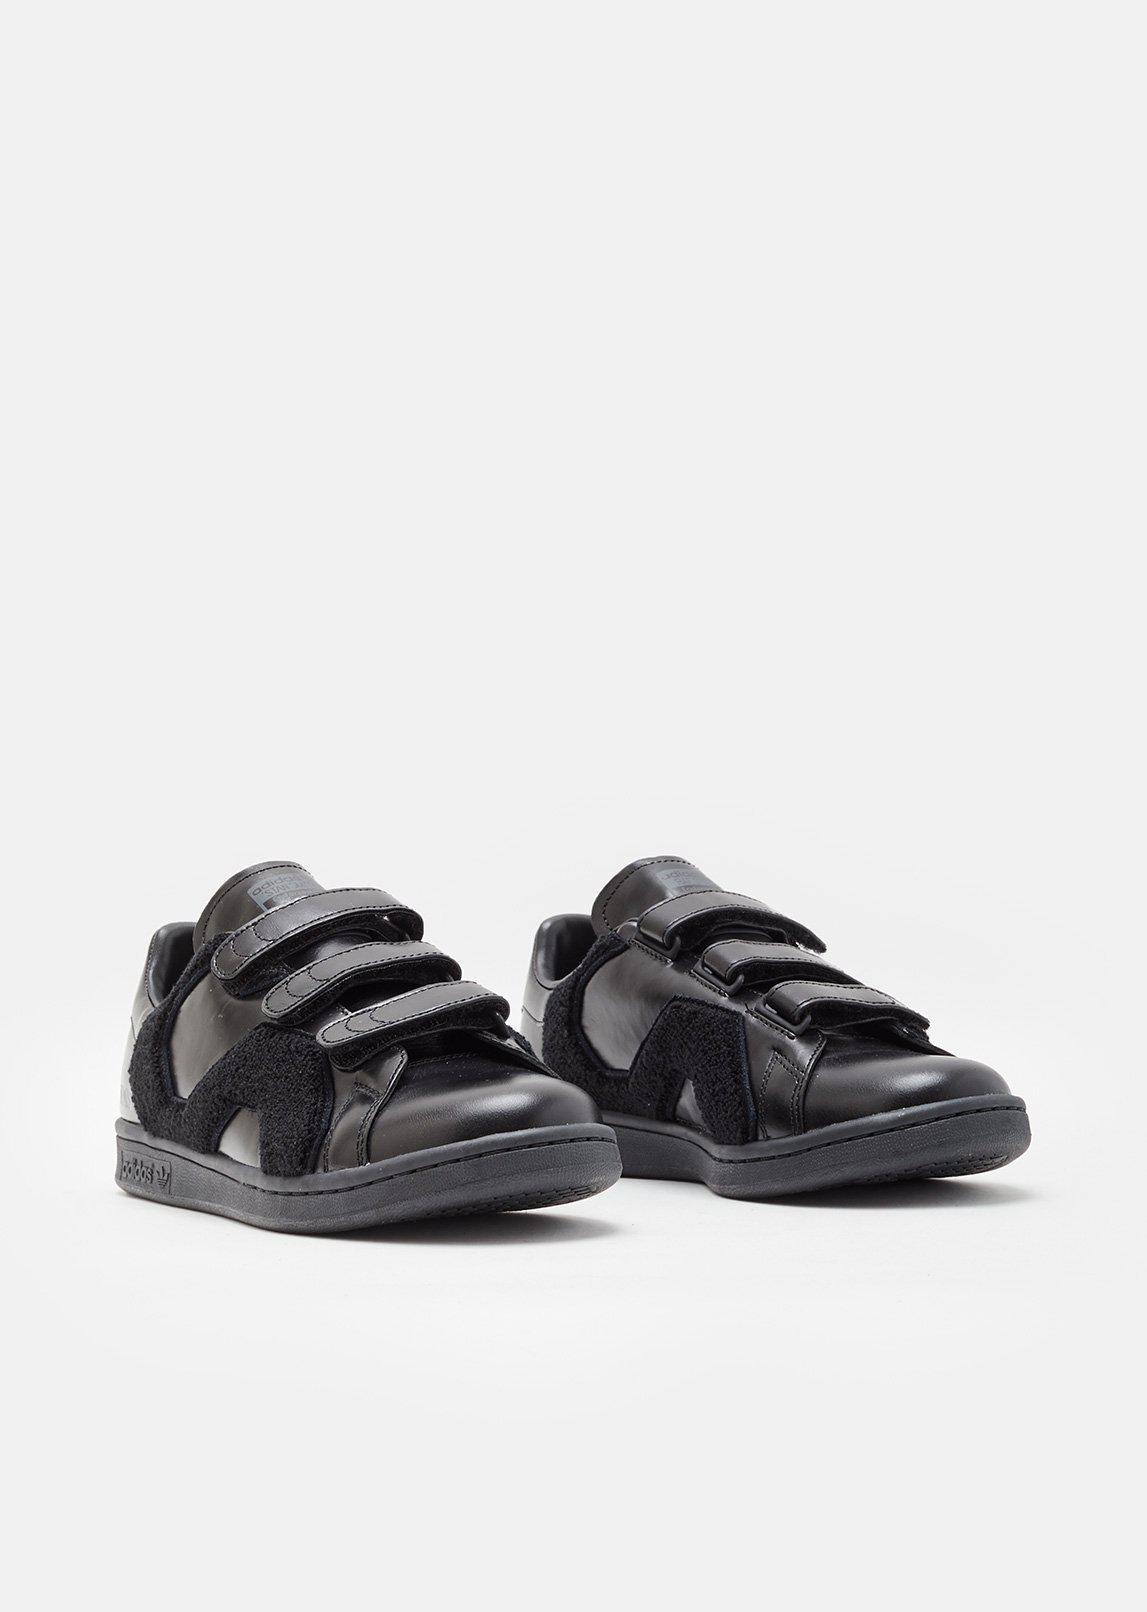 By Raf Simons Leather Stan Smith Velcro in Black -